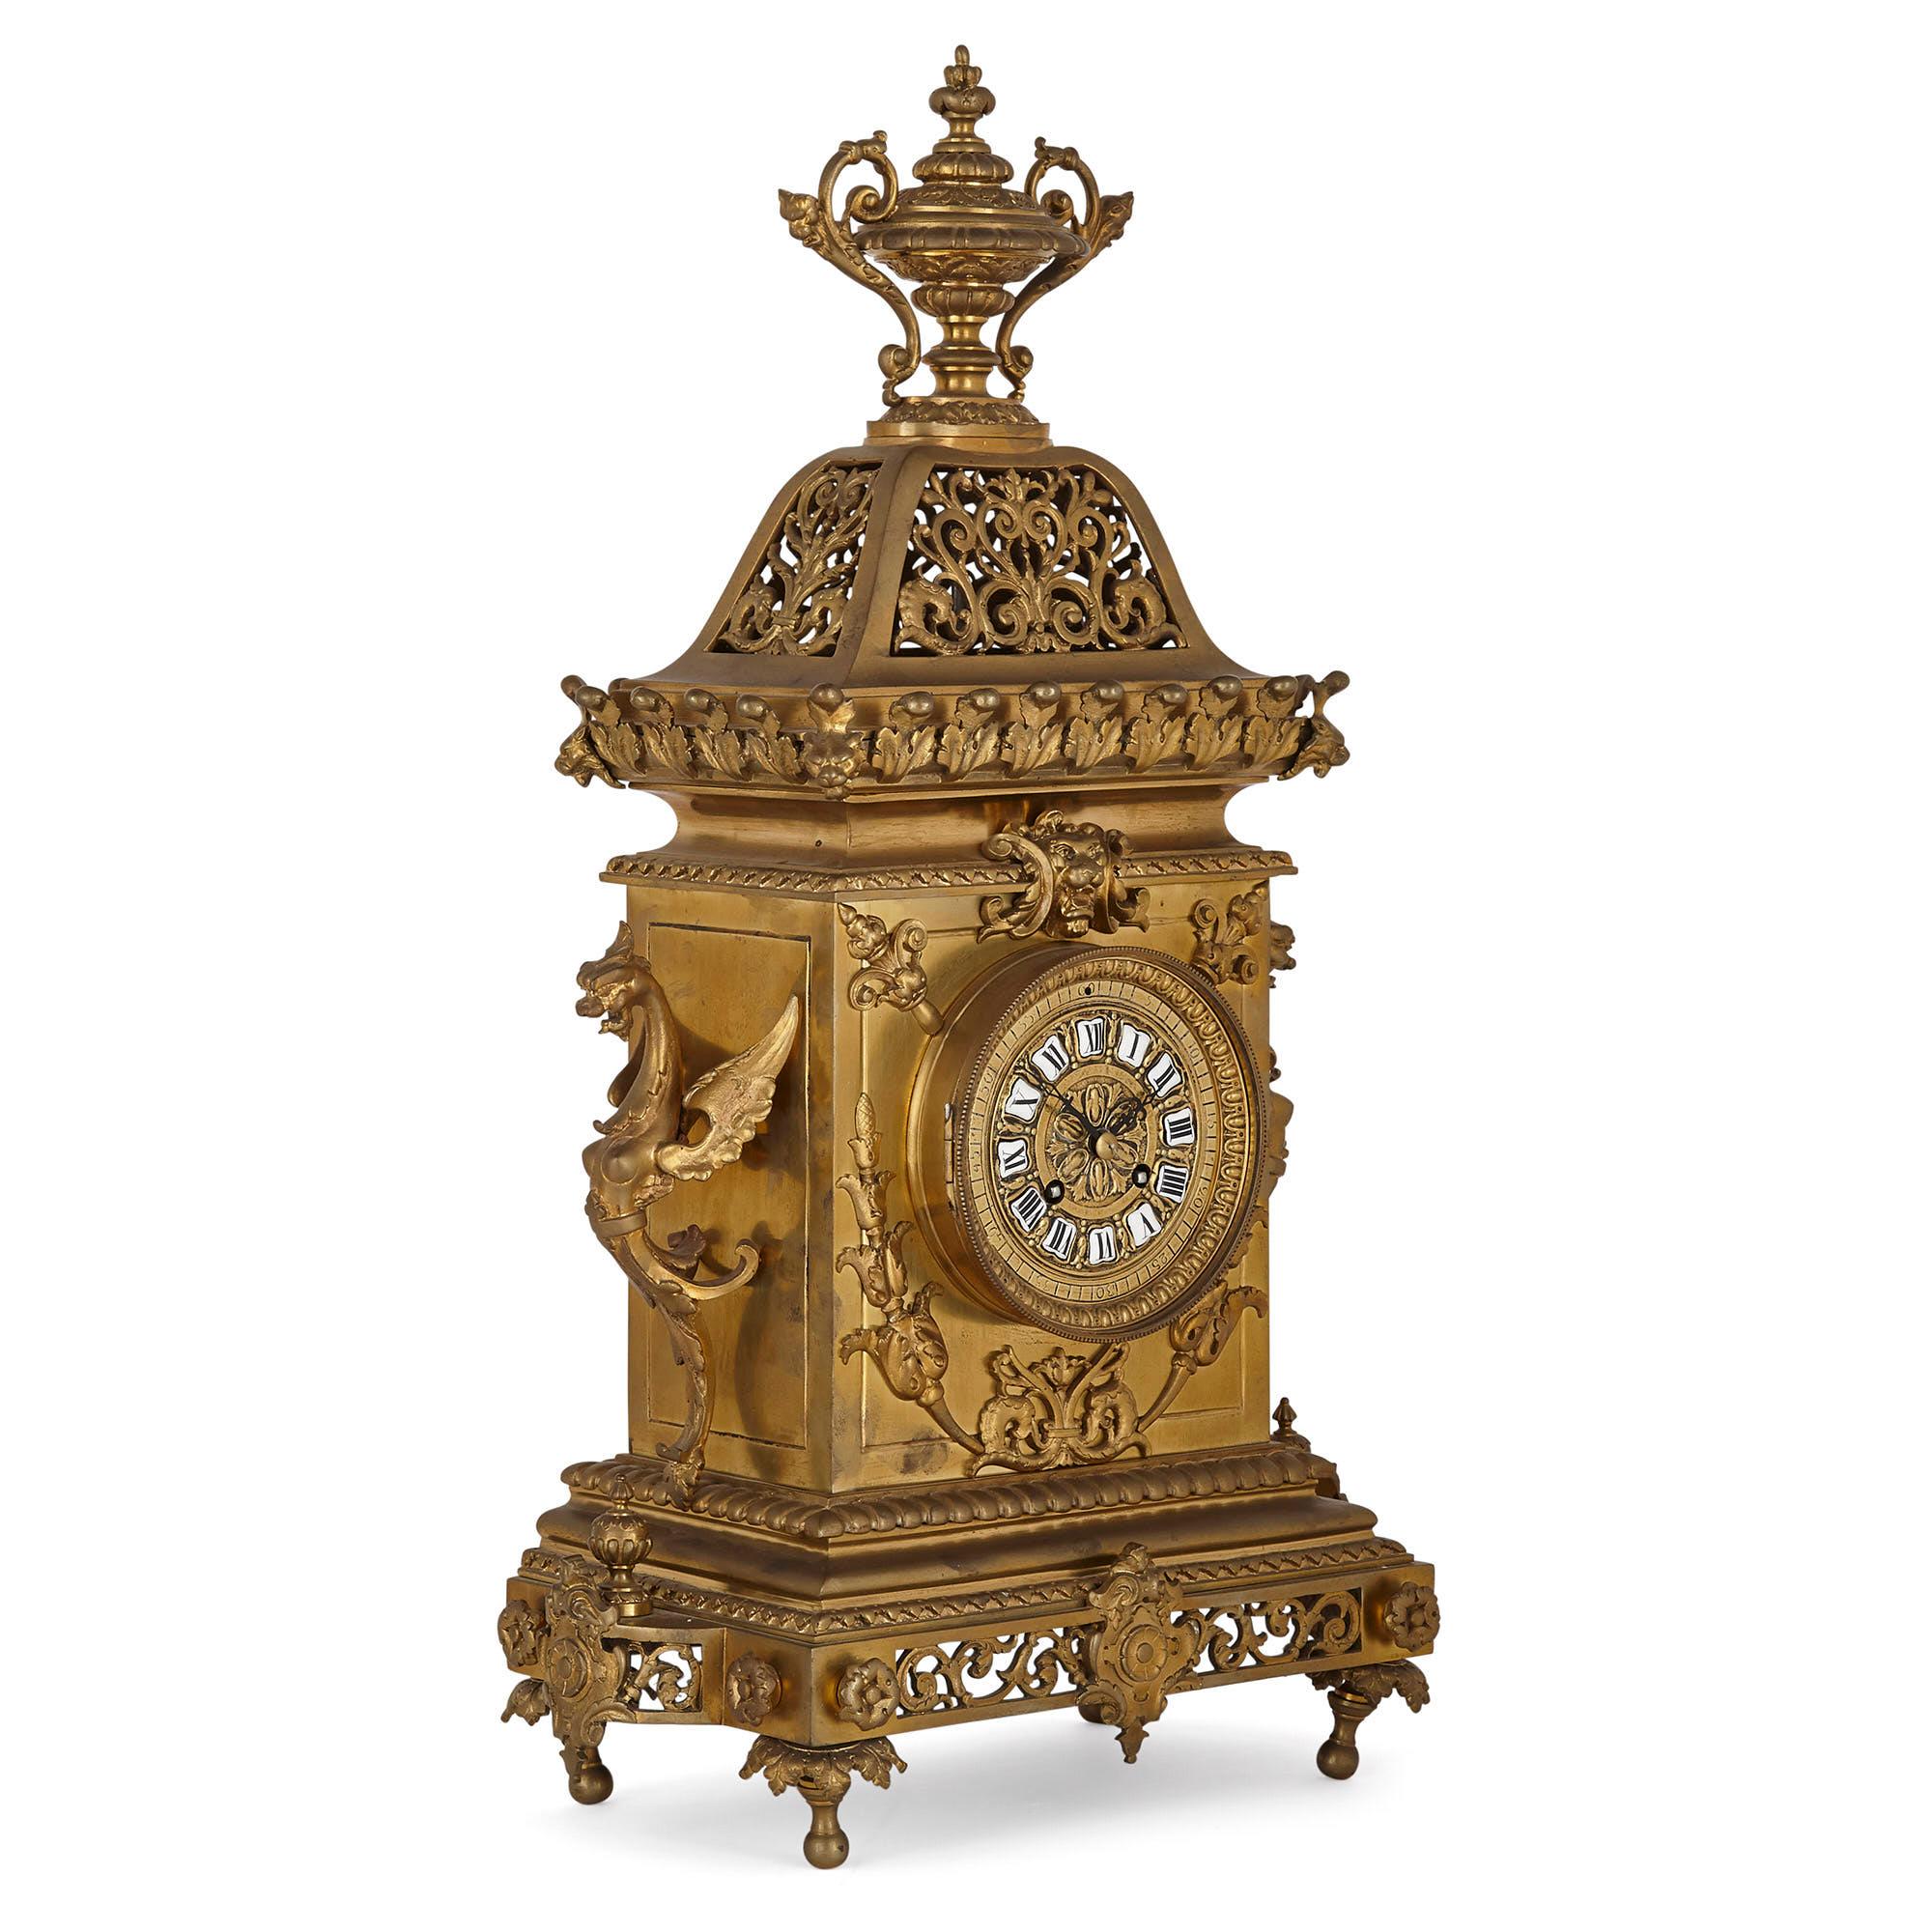 French Régence style gilt bronze clock garniture
French, late 19th century
Clock: Height 60cm, width 36cm, depth 20cm
Candelabra: Height 67cm, width 25cm, depth 25cm

This wonderfully ornate three-piece clock set is crafted from gilt bronze in